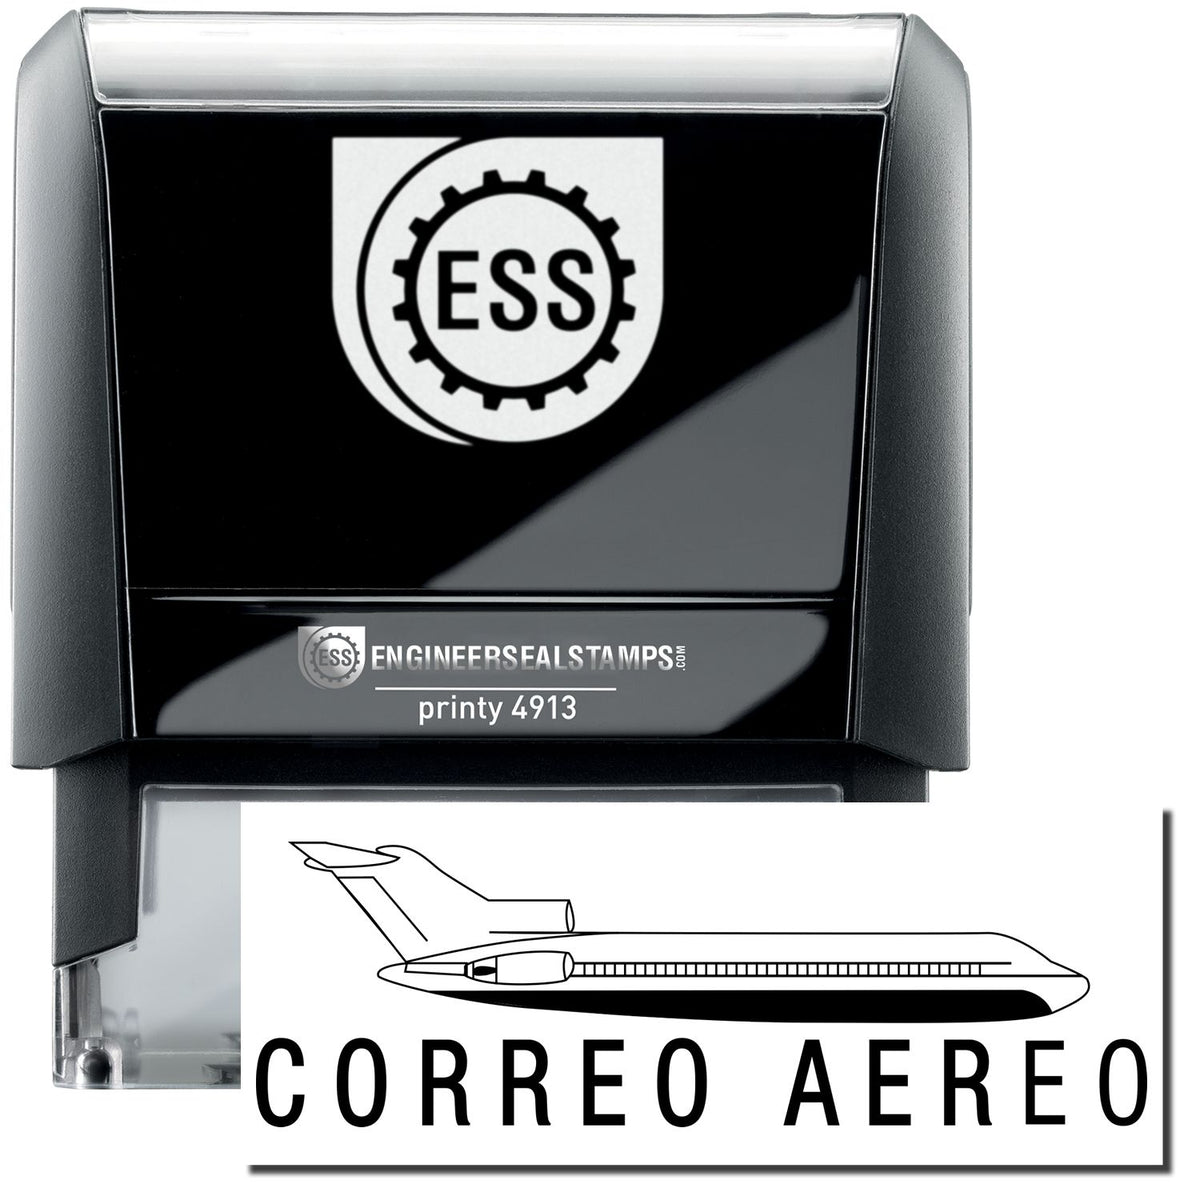 A self-inking stamp with a stamped image showing how the text &quot;CORREO AERO&quot; in a large font with an airplane icon showing above the text is displayed by it after stamping.